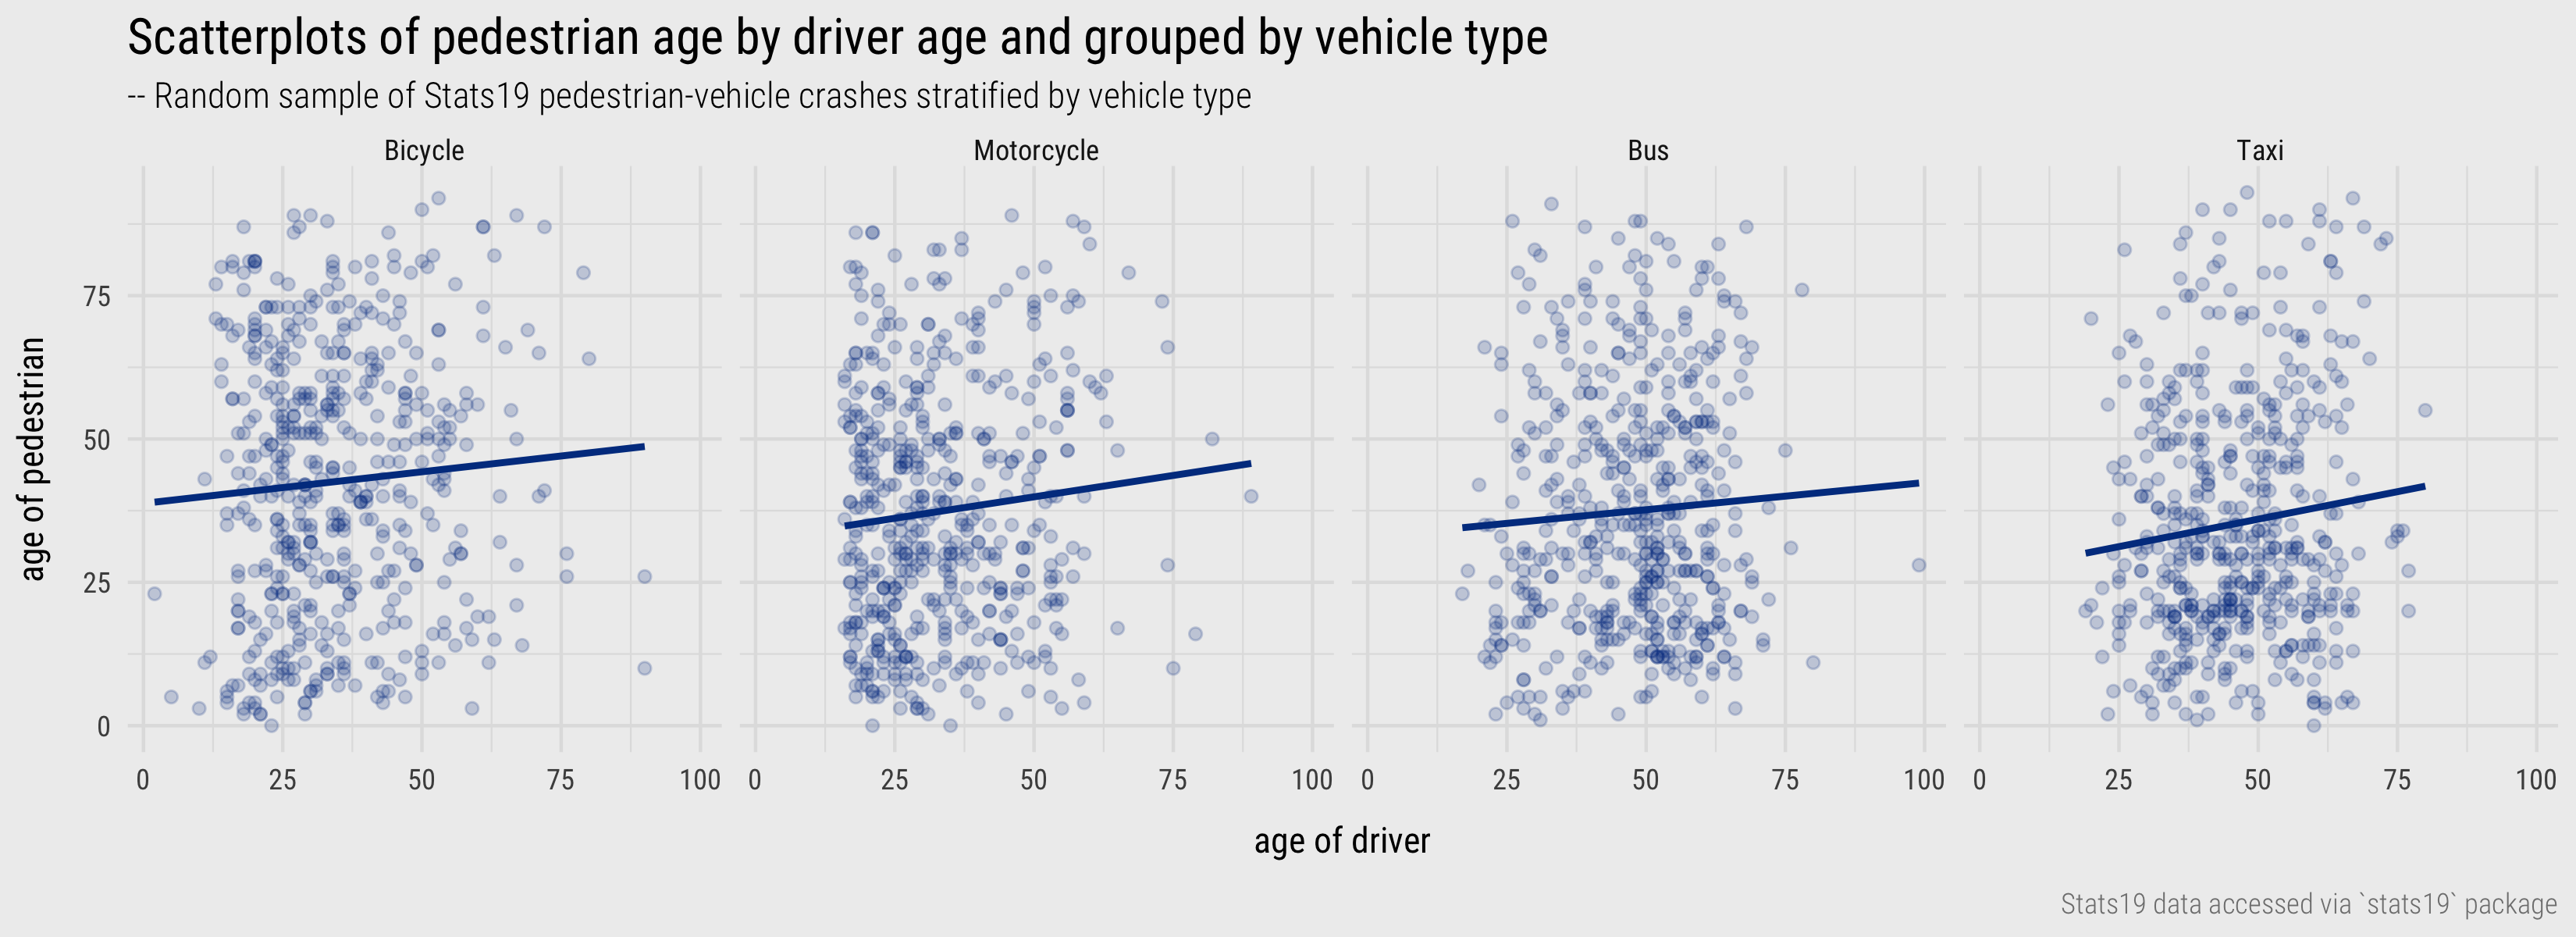 Scatterplots of pedestrian age by driver age and grouped by vehicle type.